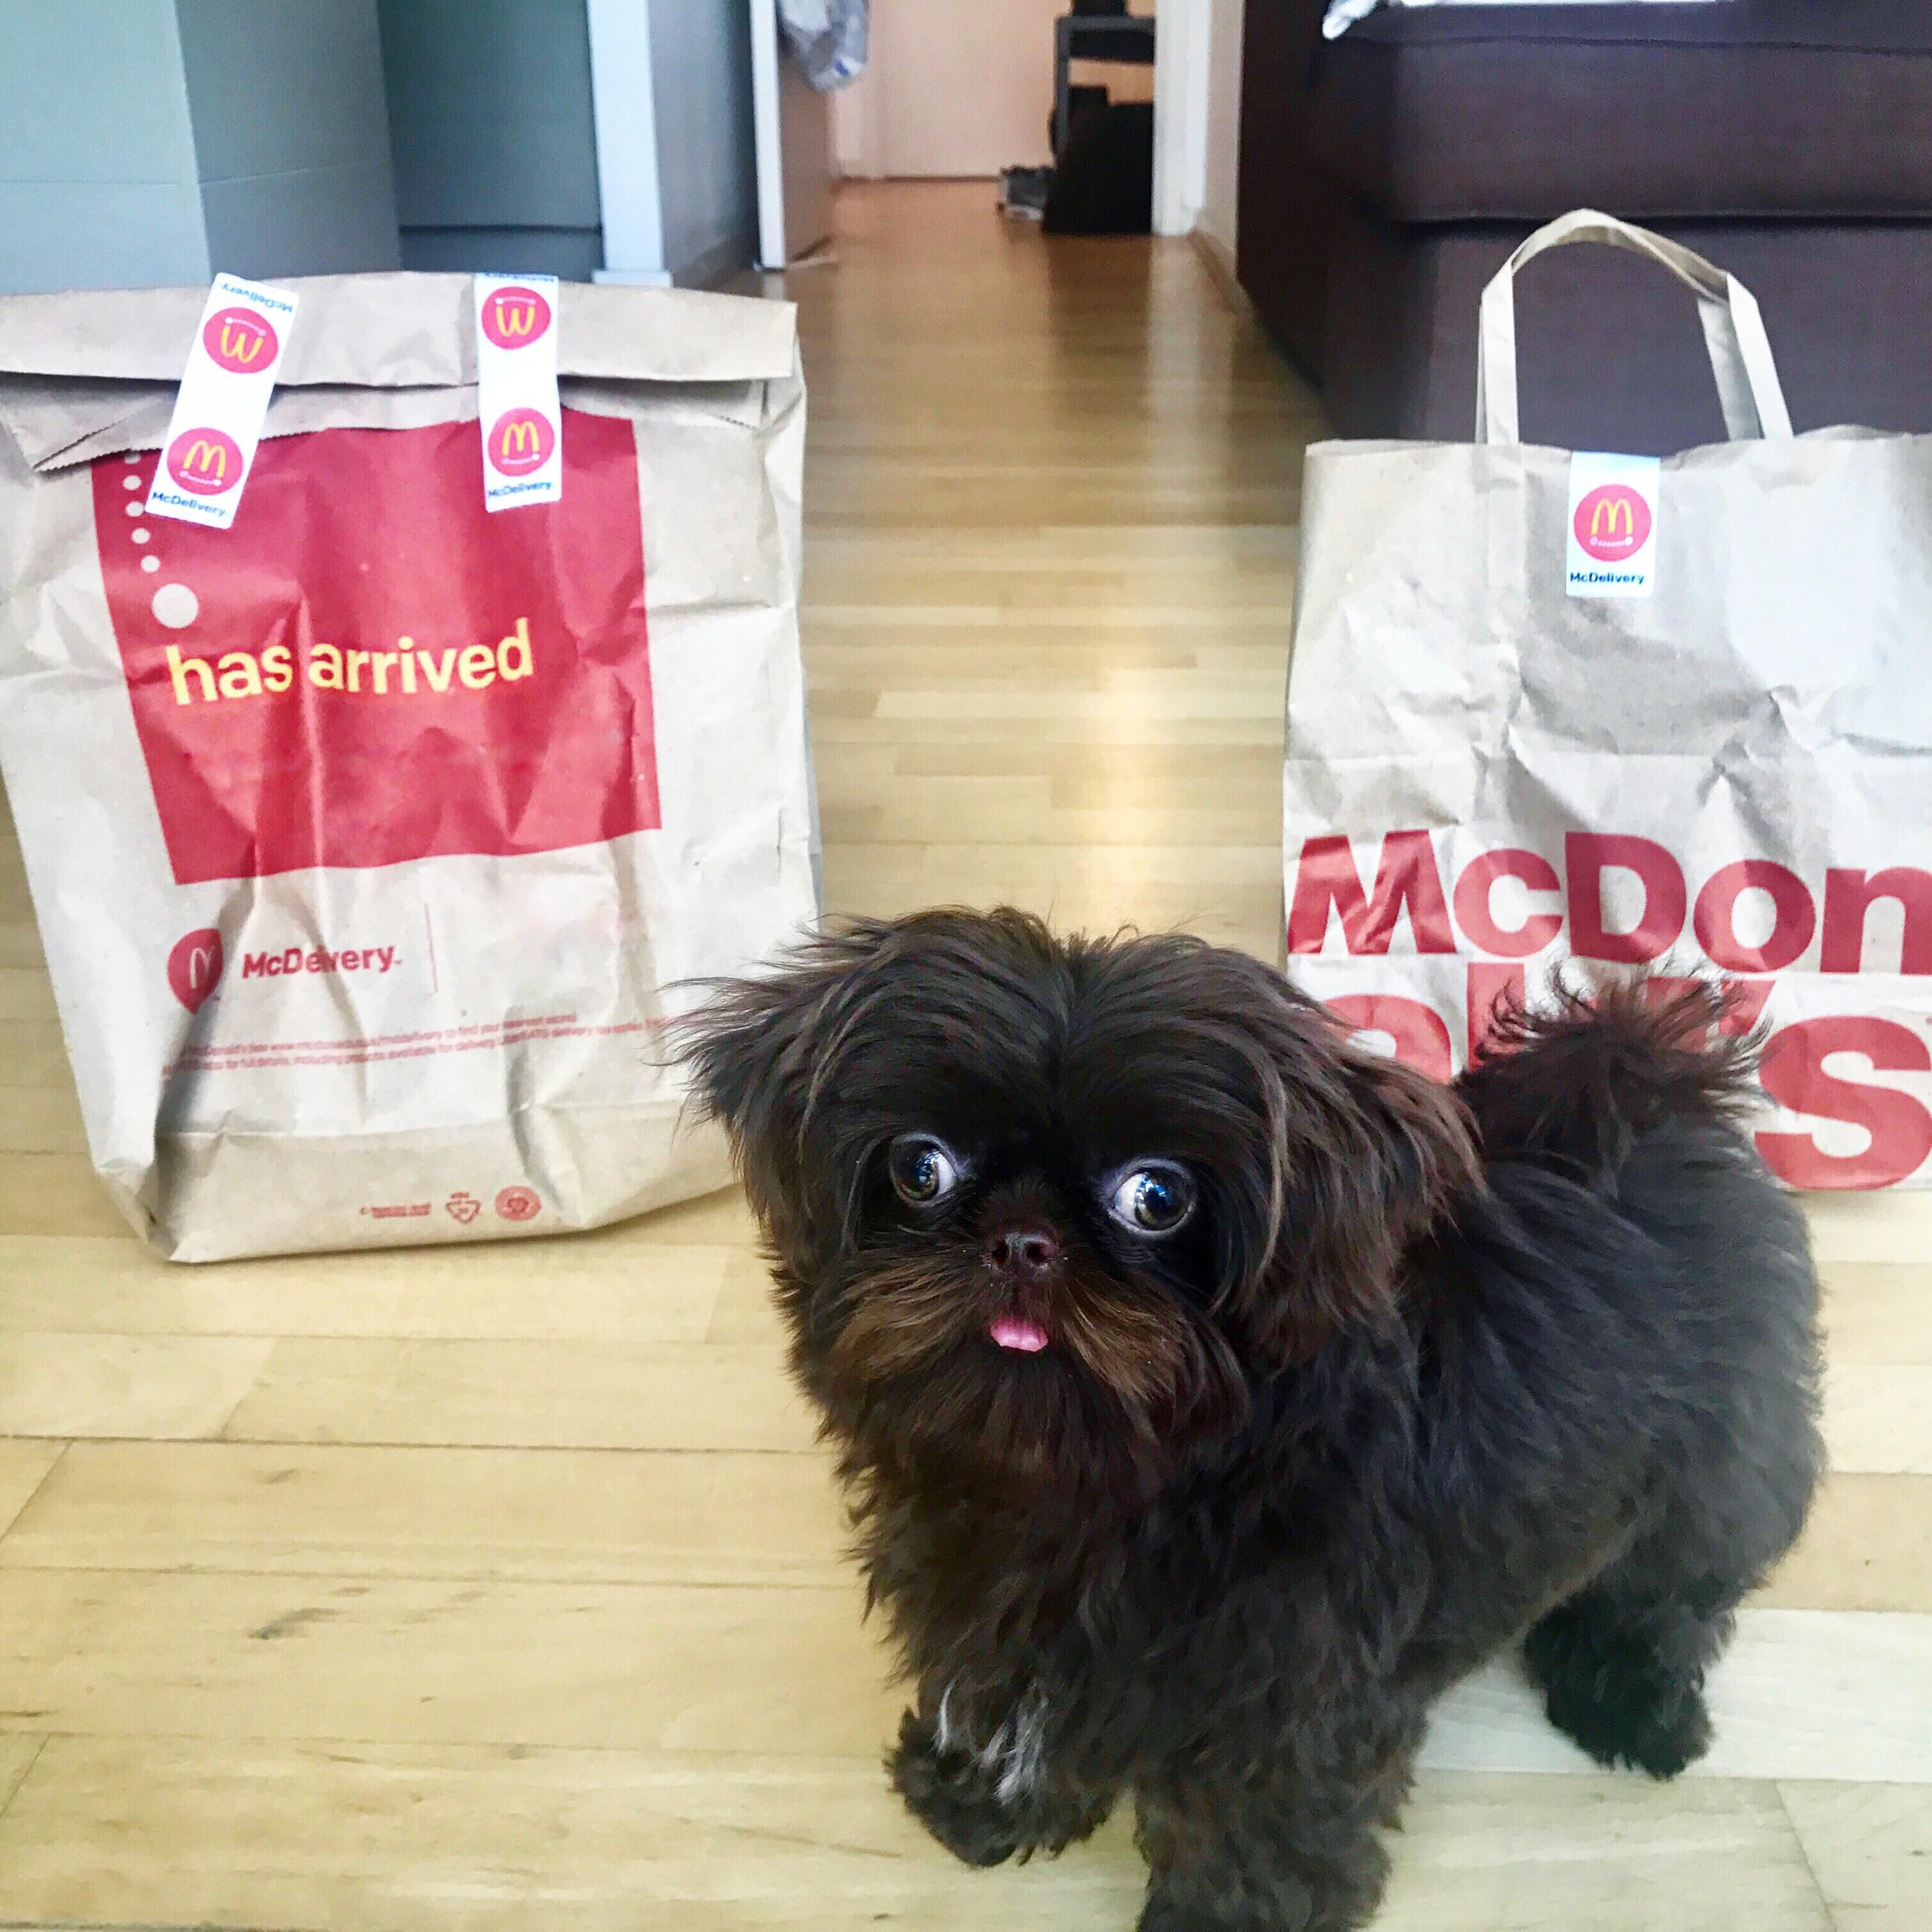 Puppy was so excited by McDonald's Delivery he couldn't keep his eyes off both bags.